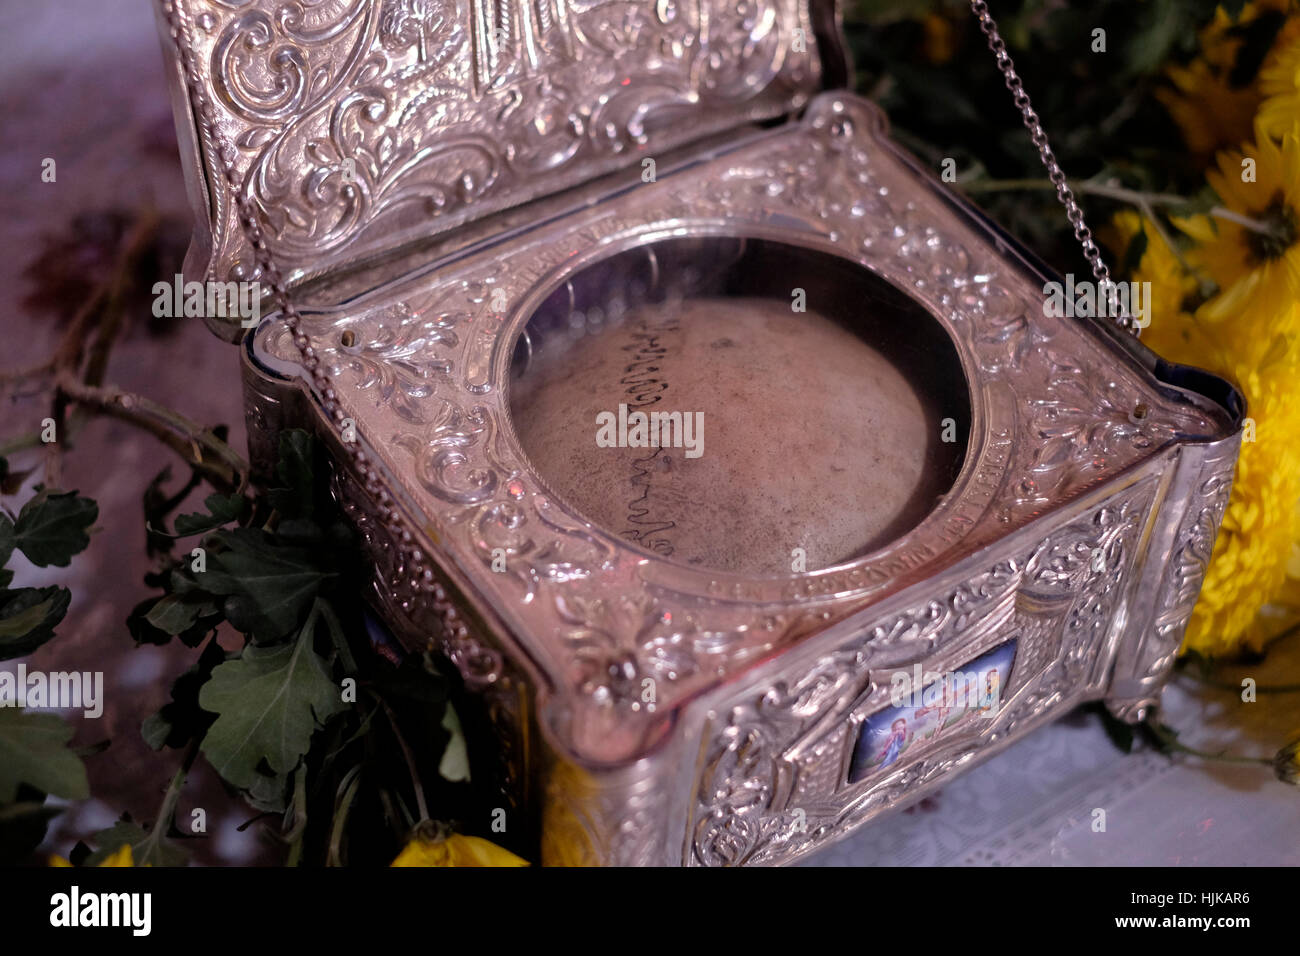 View of a silver reliquary case with a piece of a skull that is said to be a relic of Neomartyr Panagiotis an orthodox martyr inside the Greek Orthodox Church and Monastery of Saint John the Baptist located in the Christian Quarter Old city East Jerusalem Israel Stock Photo